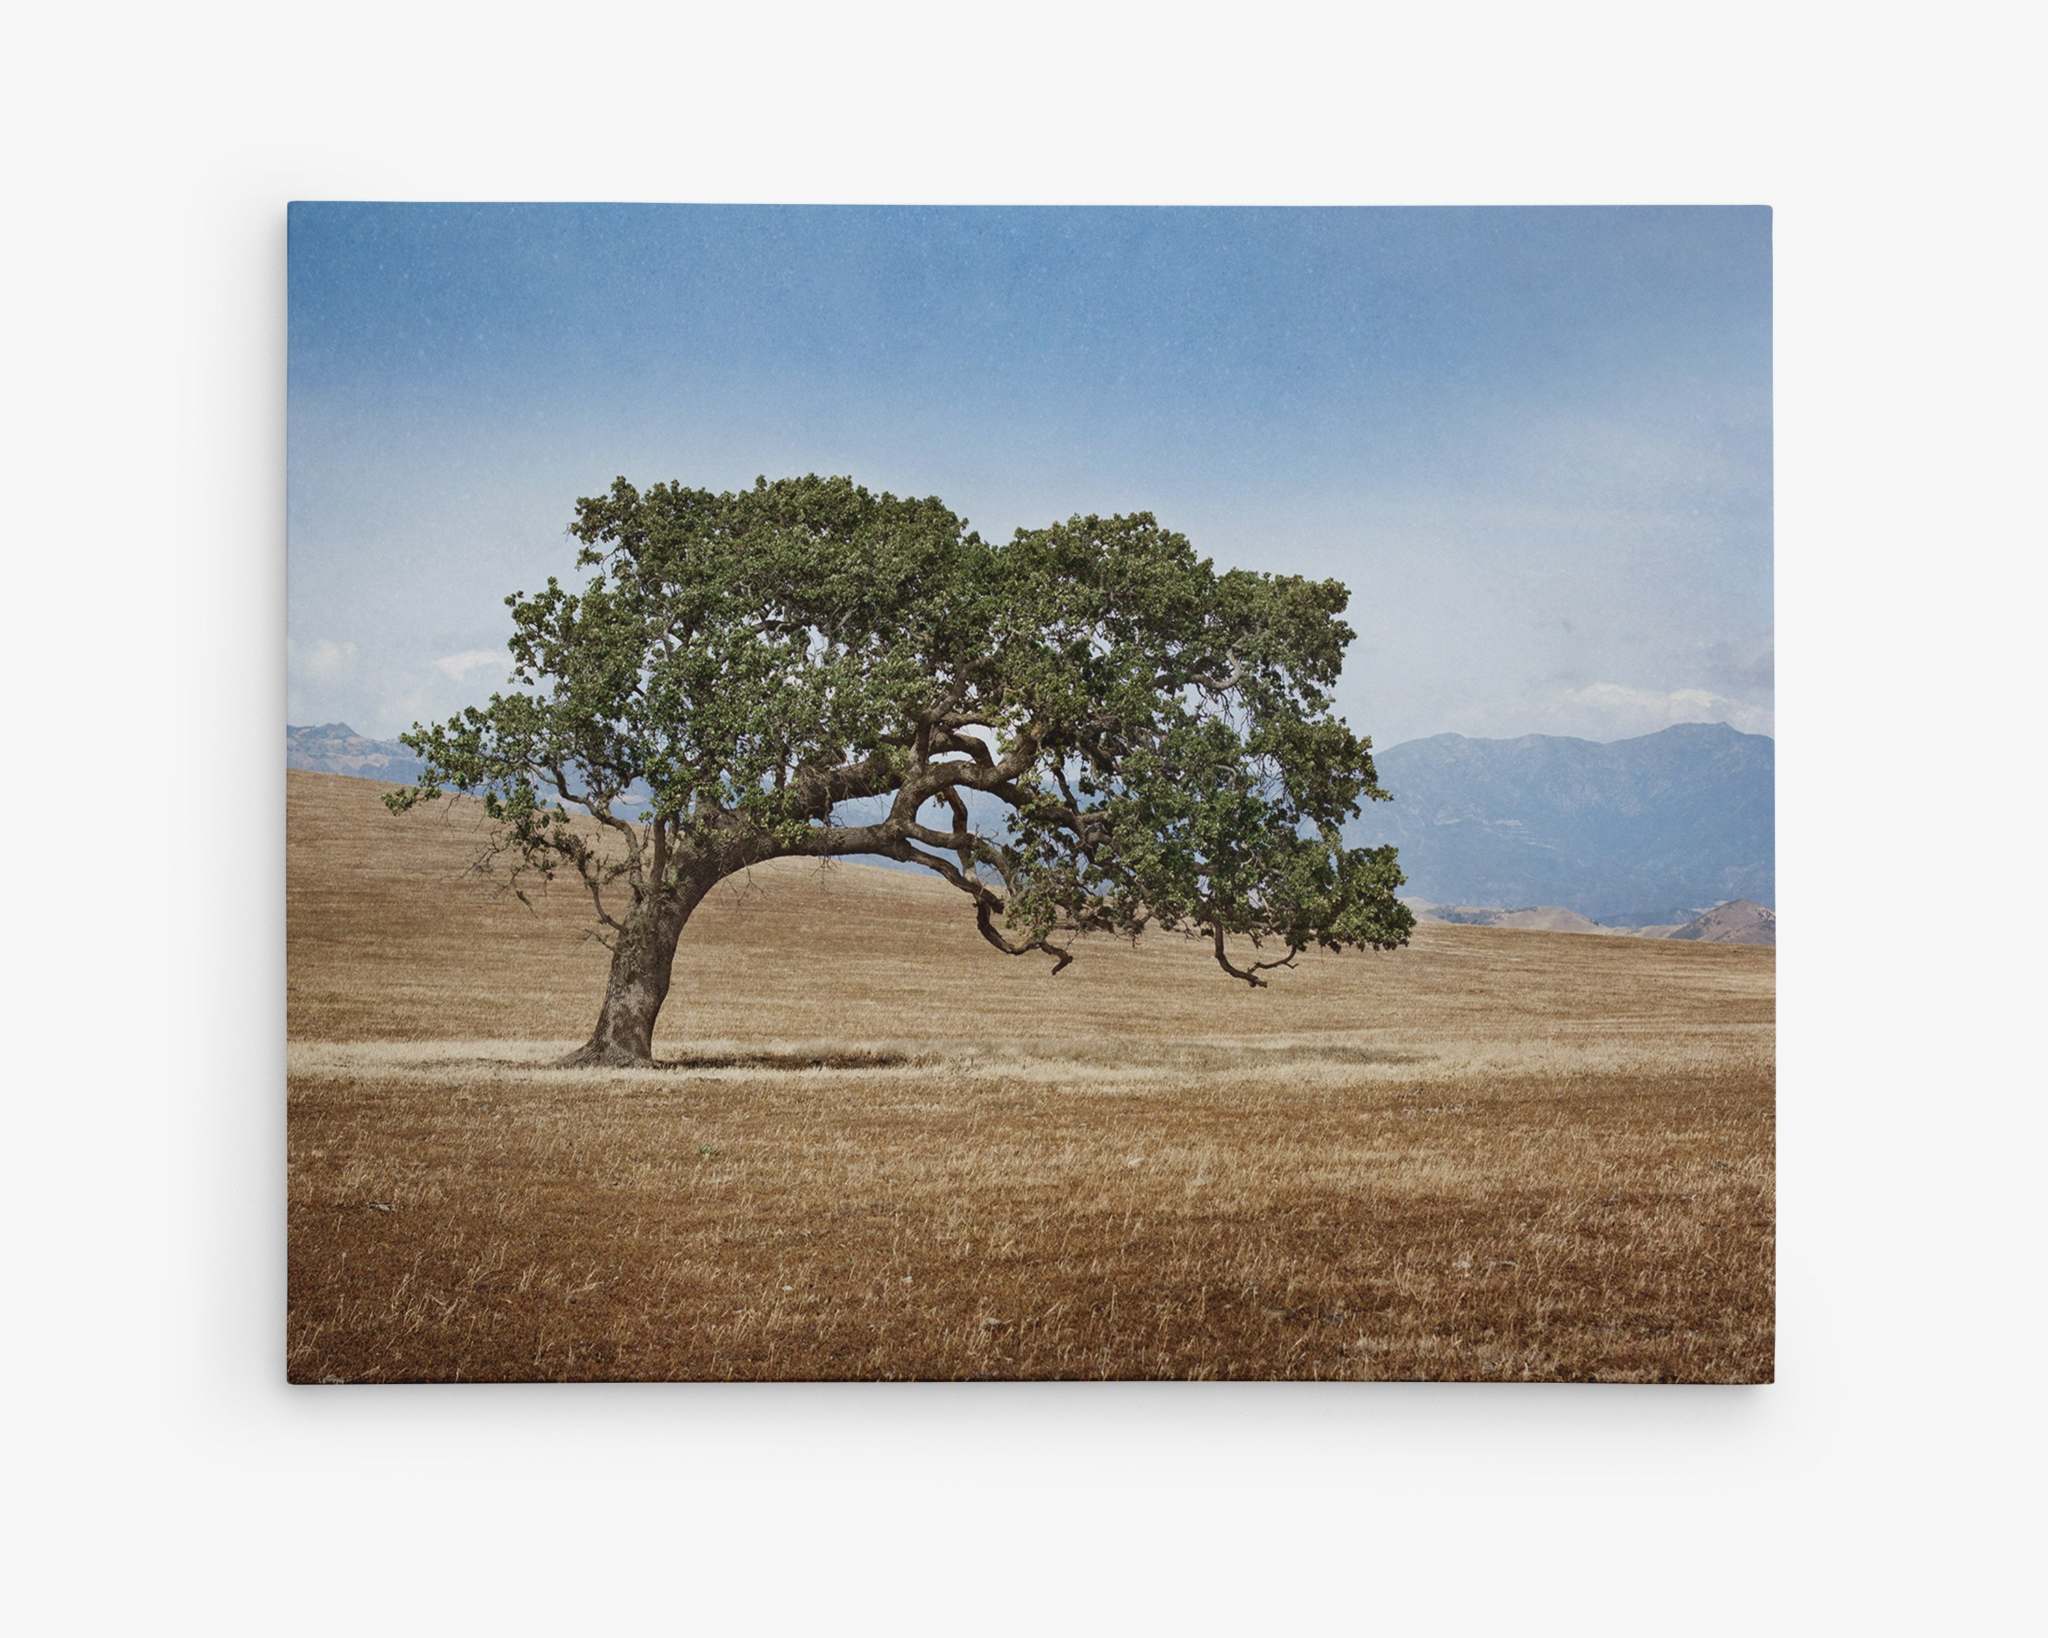 A solitary California Oak stands in an open, dry grassland under a clear blue sky. The tree has green foliage and a curved trunk. Distant mountains are visible on the horizon, rendering the scene serene and peaceful, perfect for immortalizing on Offley Green’s premium artist-grade California Landscape Wall Art, Oak Tree Canvas &#39;Windswept&#39; or as a canvas gallery wrap.